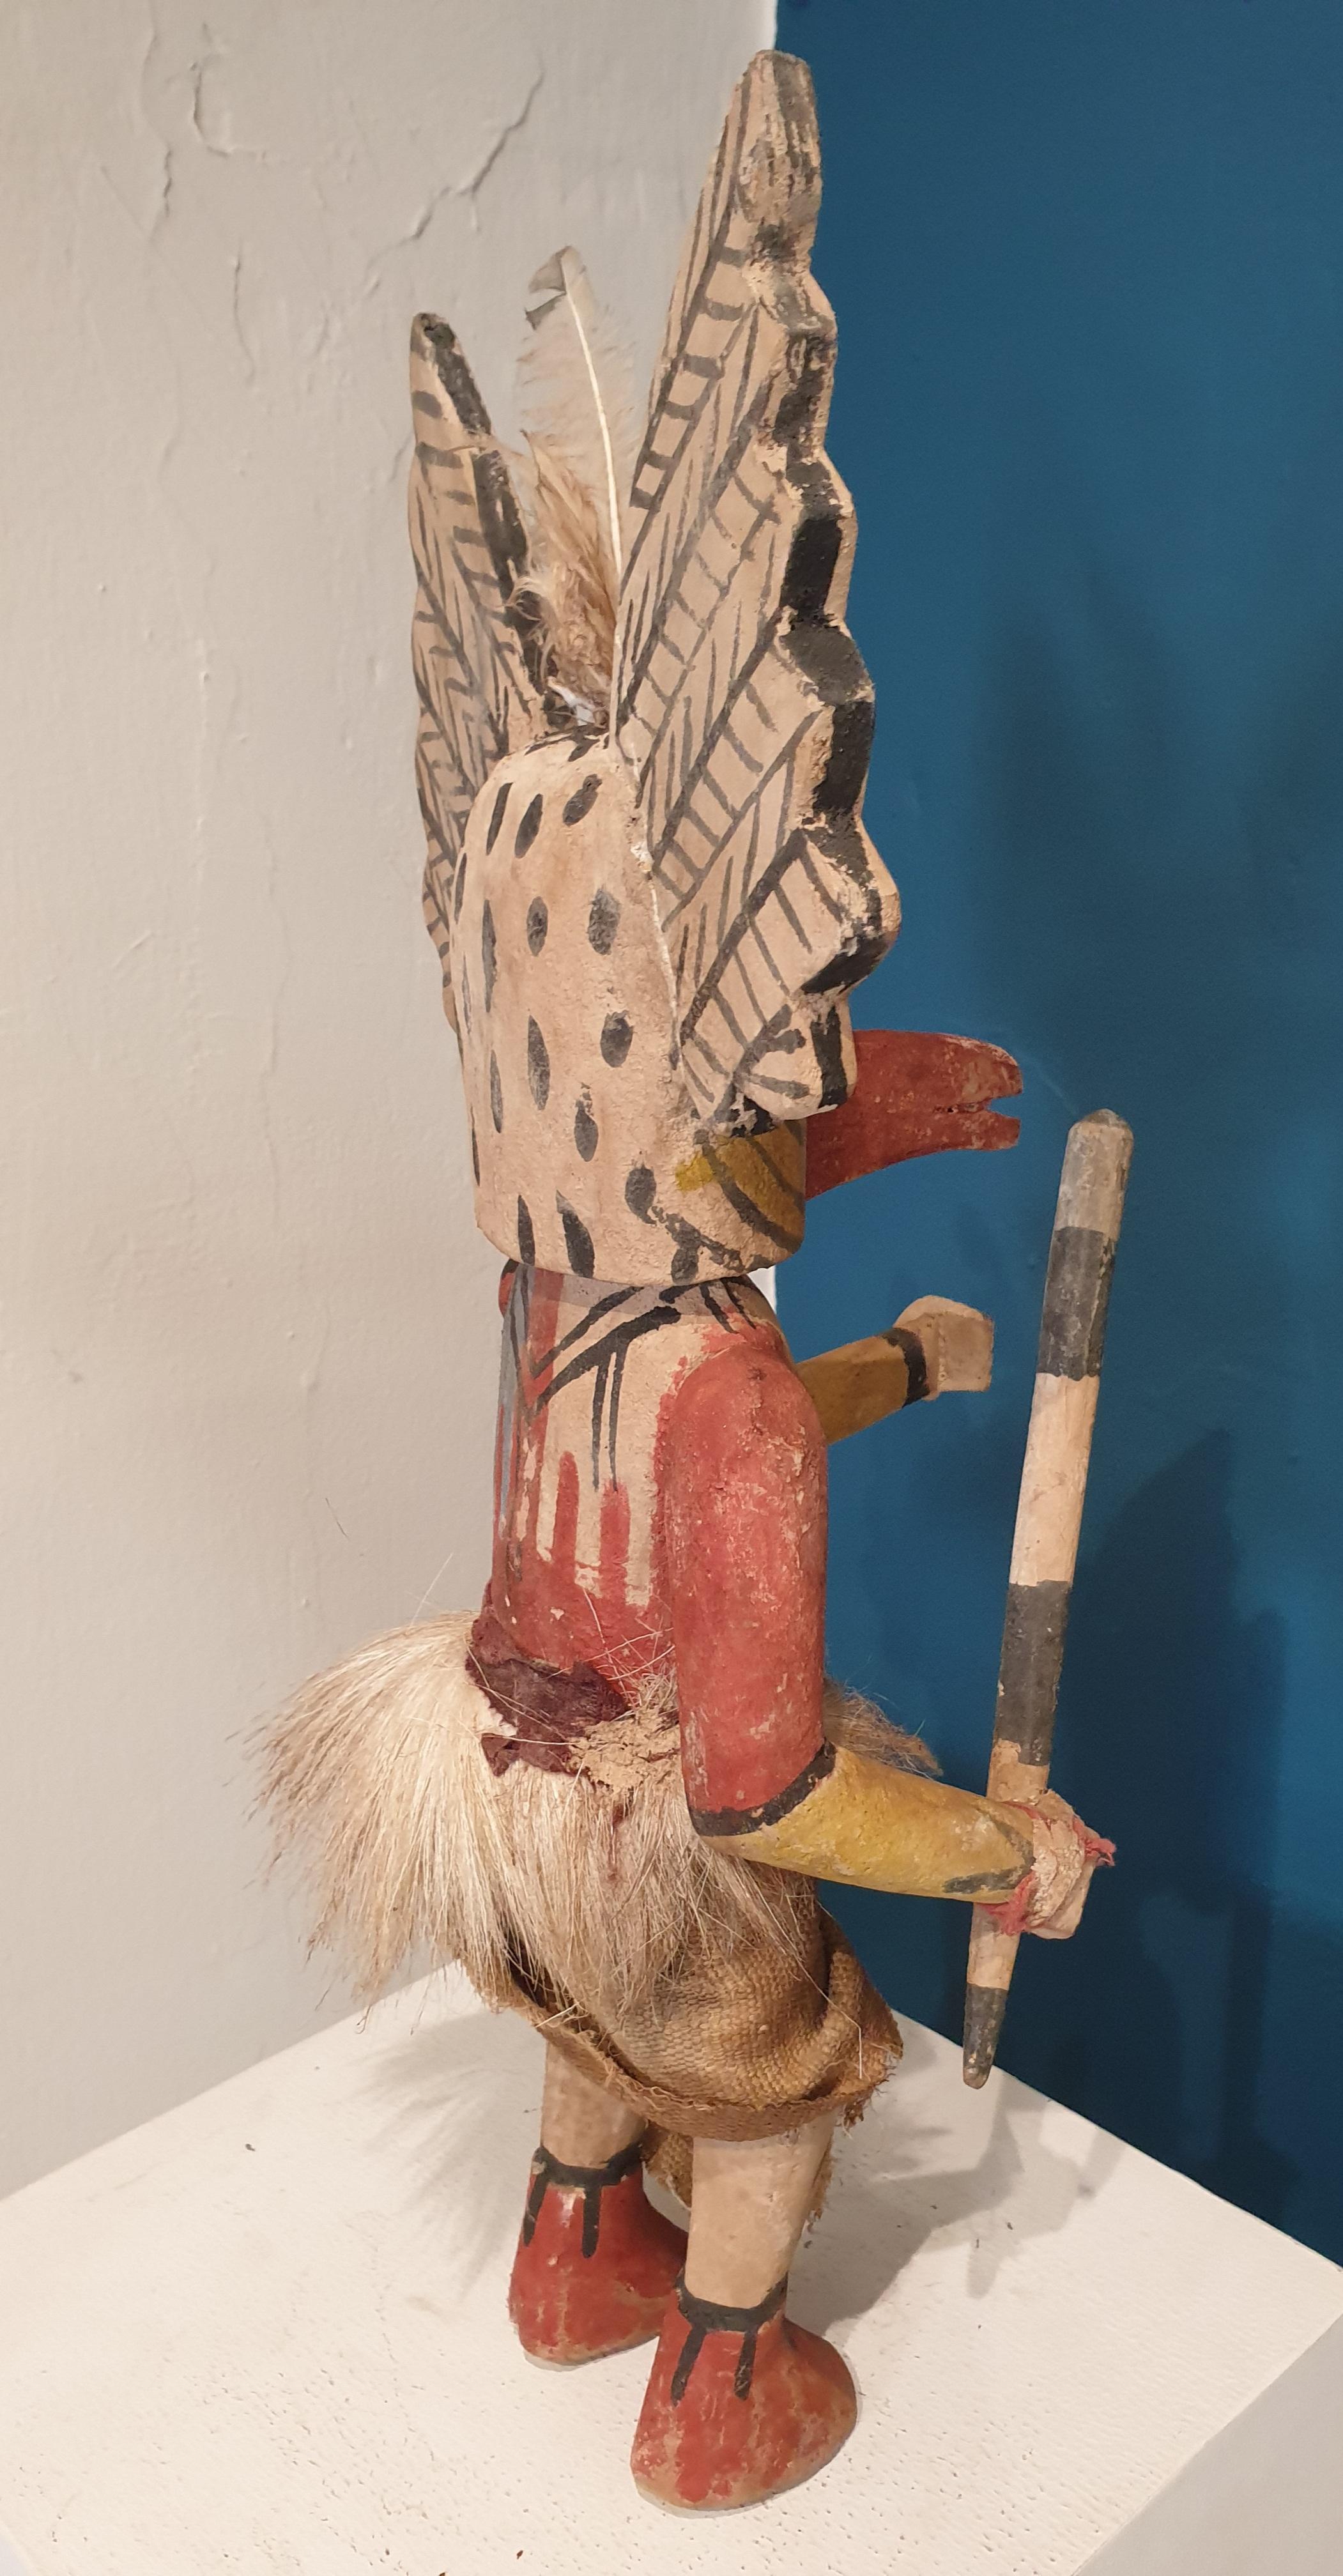 Native North American carved wood and painted effigy figure, Hopi/Navajo Katsina or Kachina doll. 

A particularly well detailed Katsina doll in good condition with feathers, fur-lined skirt, binding around the wrist to hold the wooden (talking?)